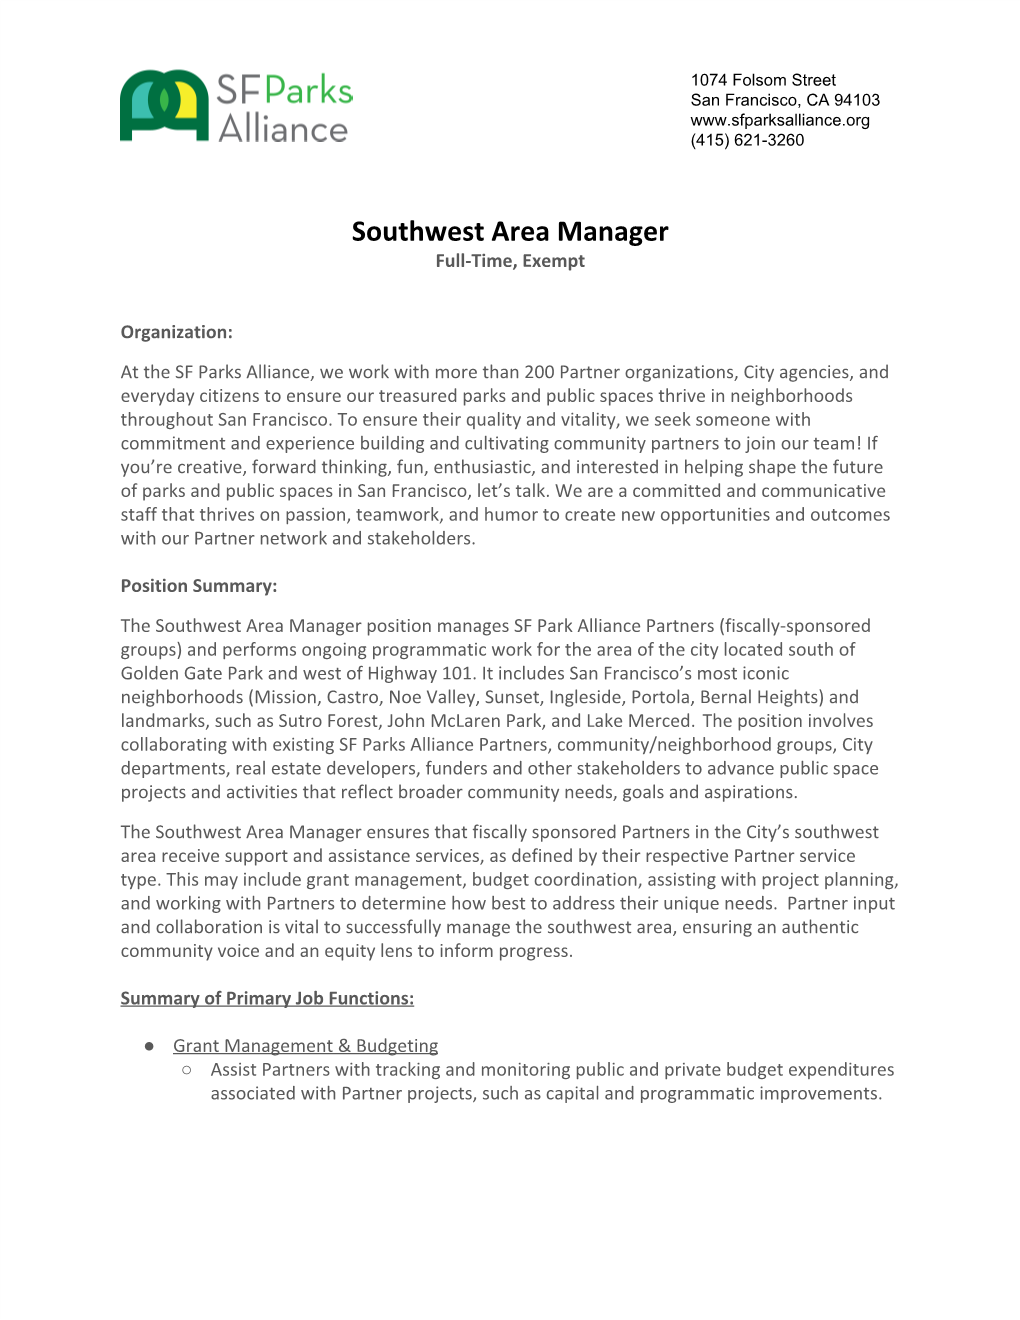 Southwest Area Manager Full-Time, Exempt